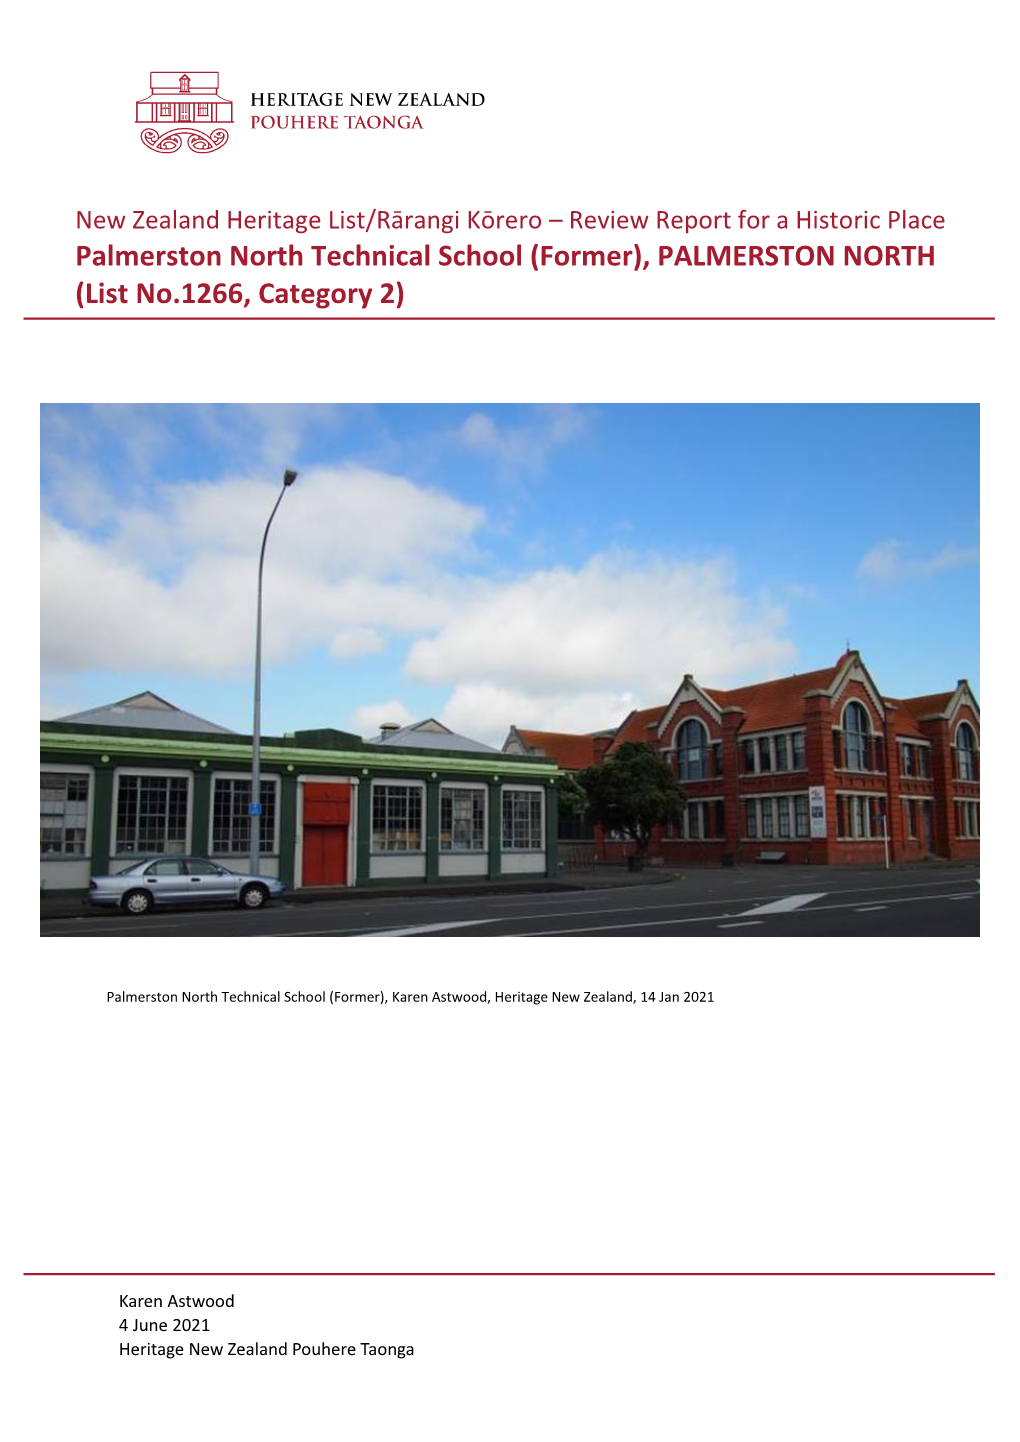 Palmerston North Technical School (Former), PALMERSTON NORTH (List No.1266, Category 2)